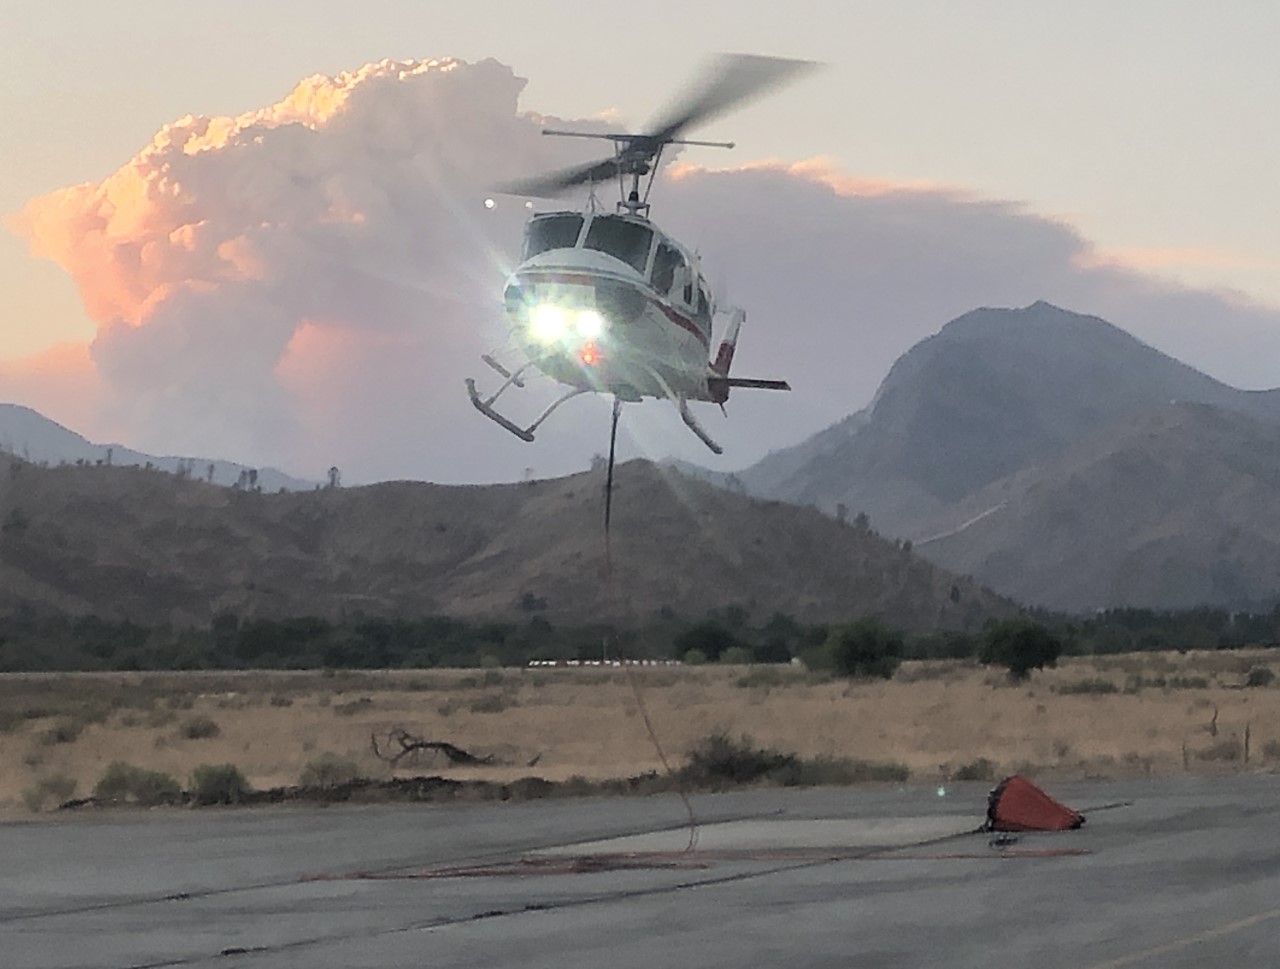 H66HJ, an AFS contracted Bell 205A1++ out of Galena Zone assigned to the Windy fire in Southern California, returning at the end of shift to Kernville from doing bucket work. (Christopher Havener, NPS).